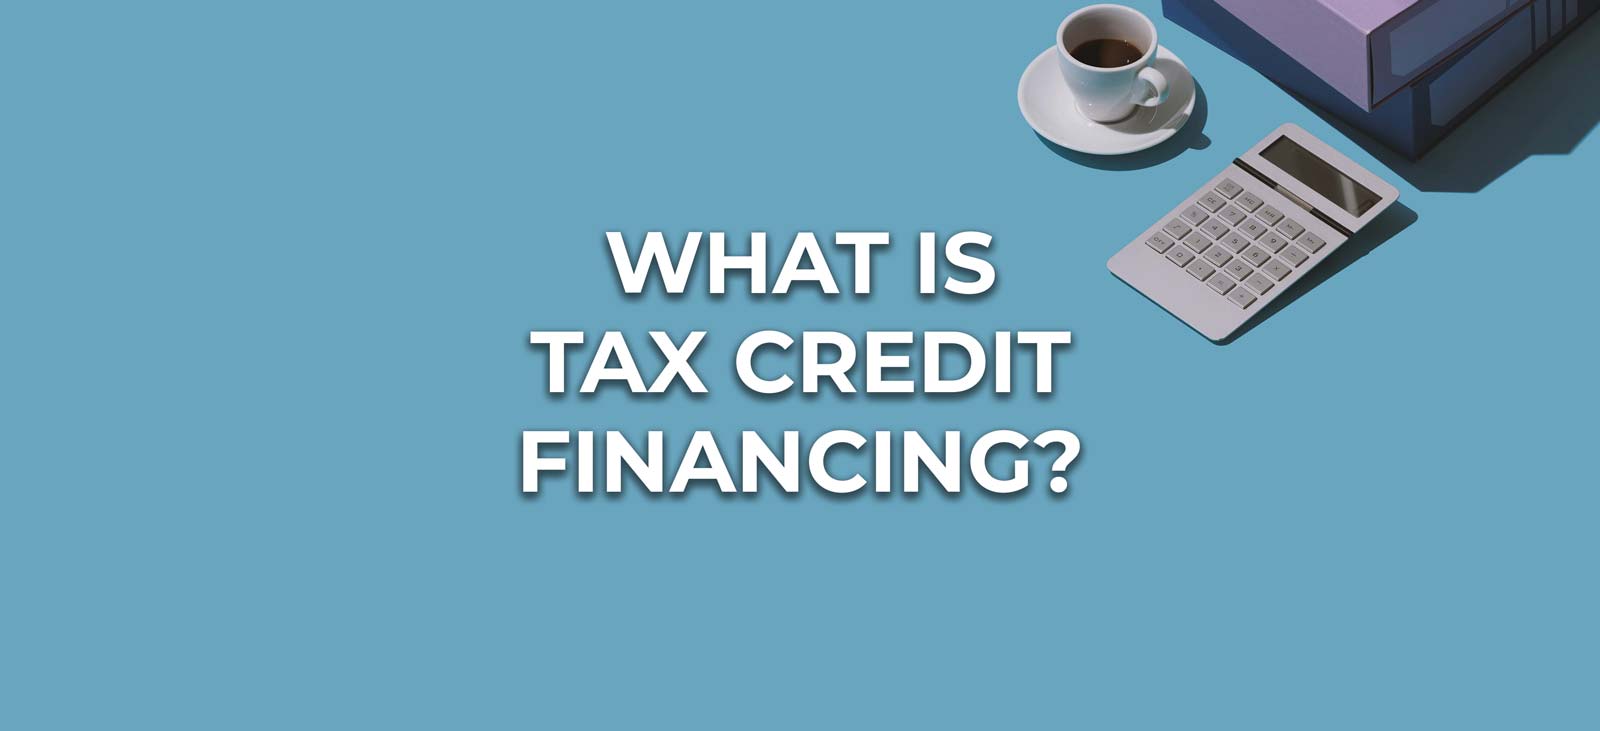 What is tax credit financing? - image